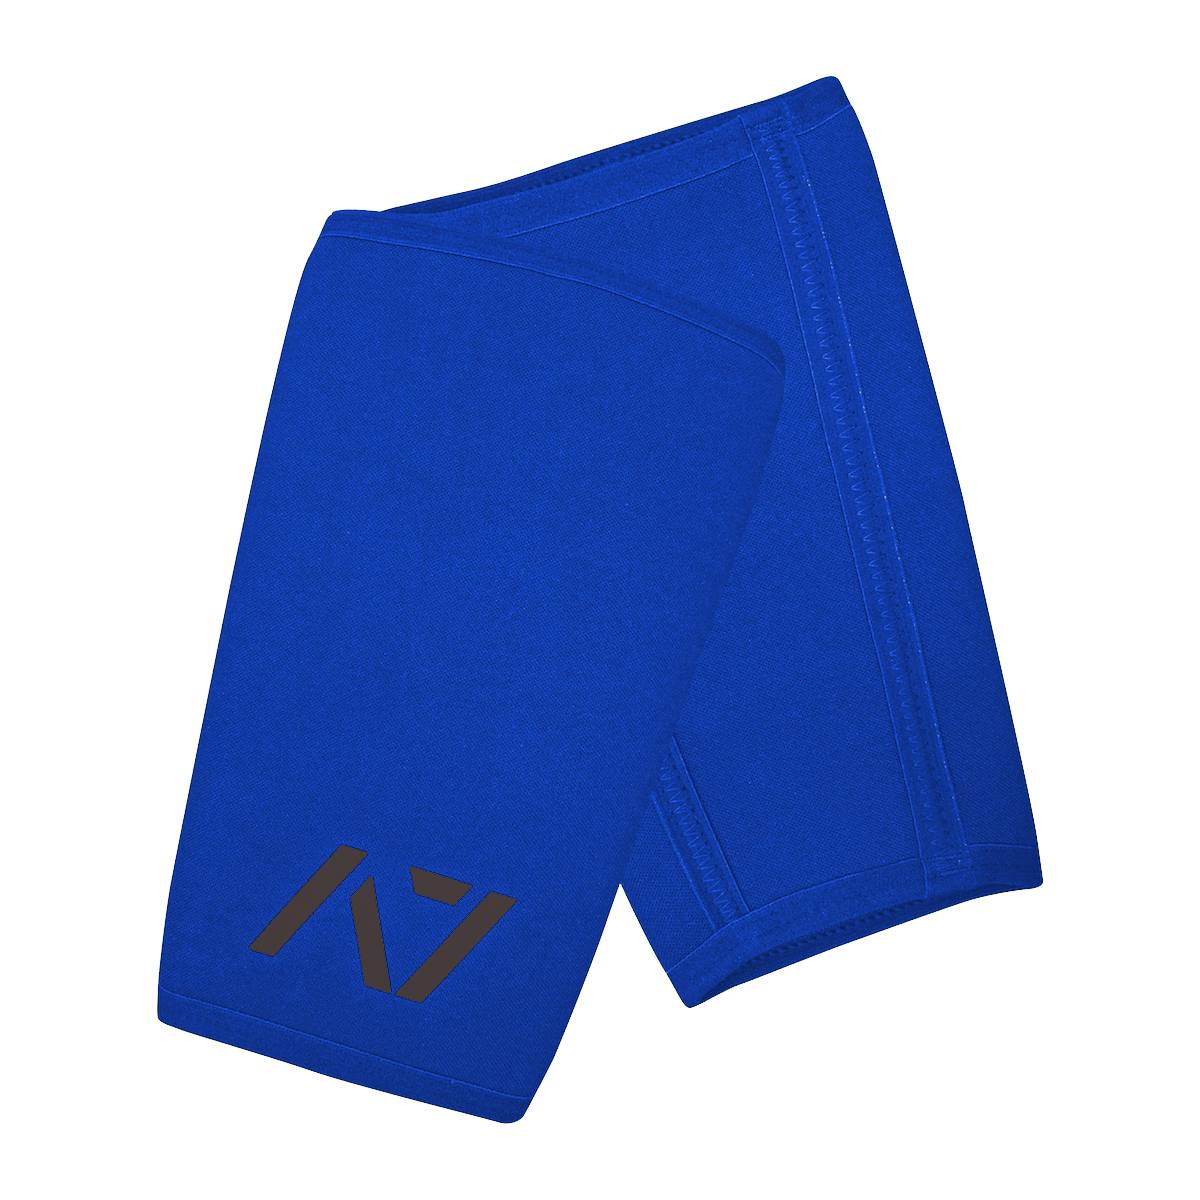 A7 IPF approved Royal CONE knee sleeves are structured with a downward cut panel on the back of the quad and calf to ensure ultimate compression at the knee joint. A7 CONE knee sleeves are IPF approved for use in all powerlifting competitions. A7 cone knee sleeves are made with high quality neoprene and the knee sleeves are sold as a pair. The double seem on the knee sleeves create a greater tension on the knee joint. Available in UK and Europe including France, Italy, Germany, Sweden and Poland